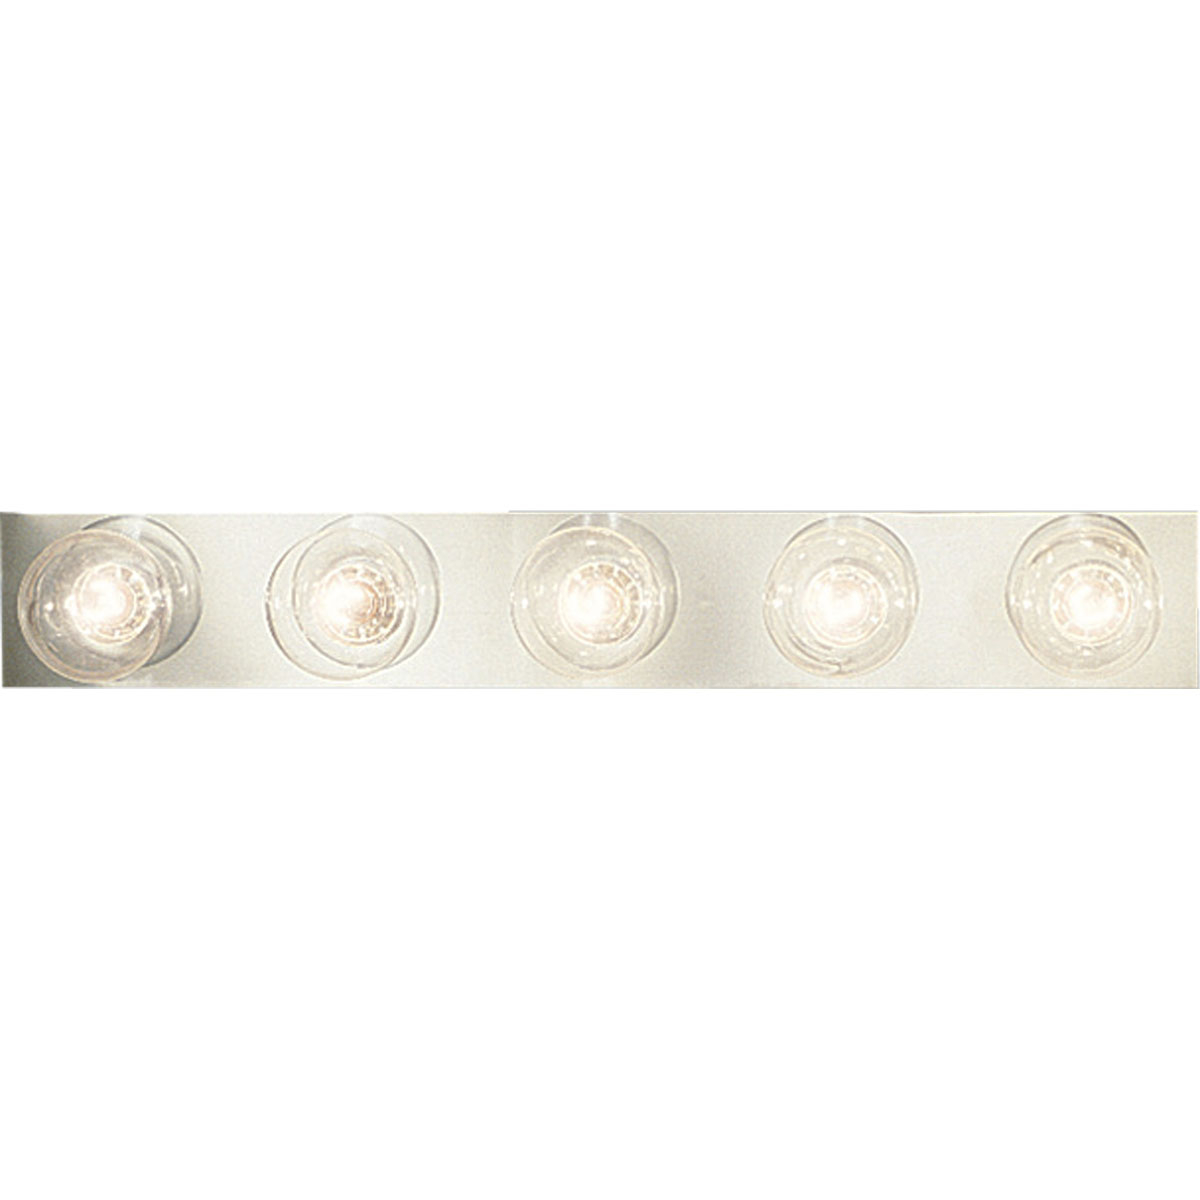 Five-light broadway lighting strips. Sockets are on 6 inch centers. UL listed for ceiling mounting with 25w max lamps. This traditional bath strip light complements most traditional bathrooms or powder rooms. Brilliant metallic finish coordinates with popular faucet and bath hardware styles. Easy to install with included hardware.